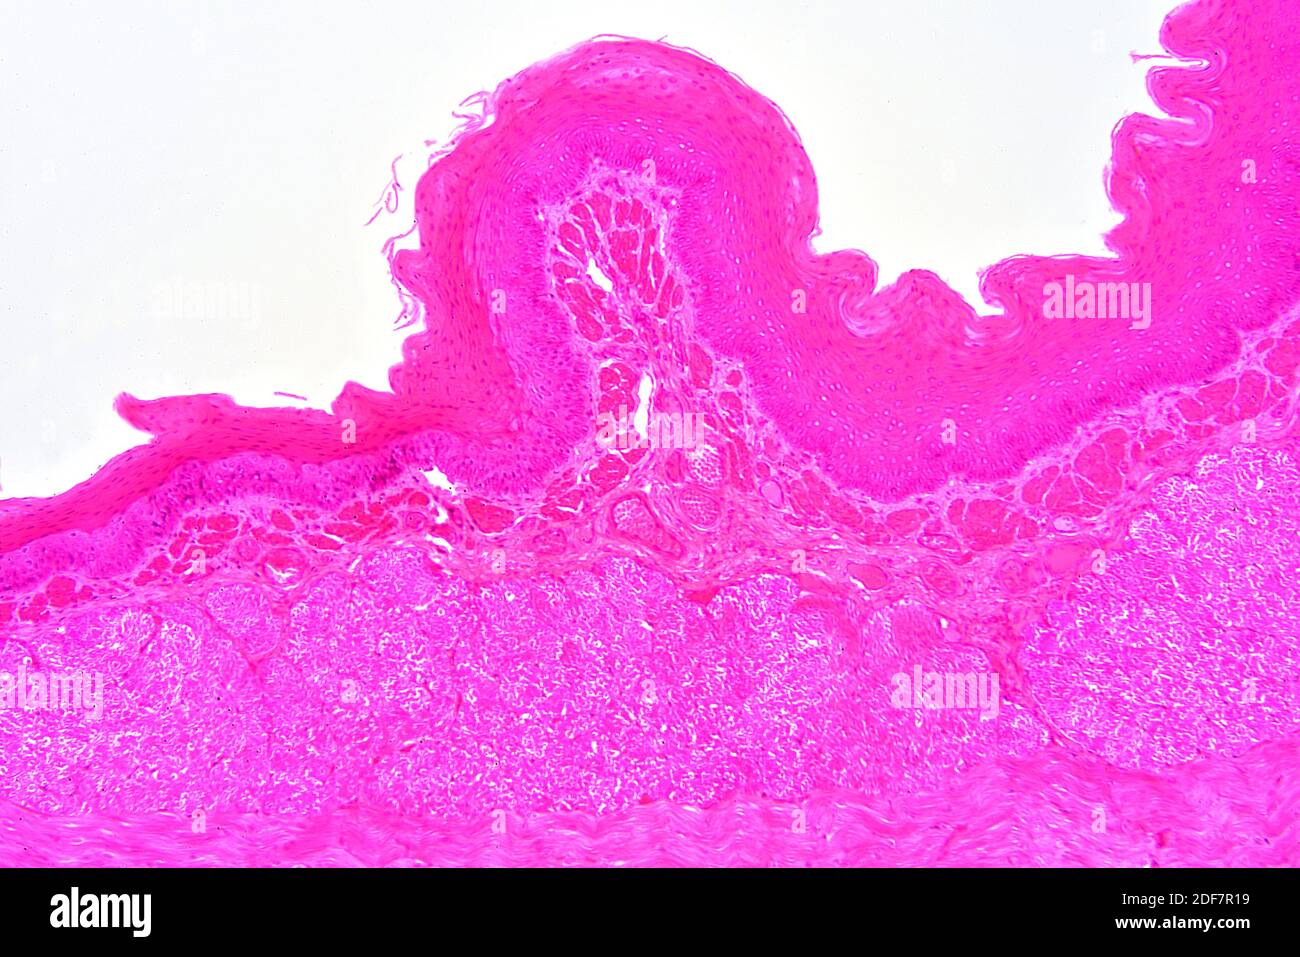 Human esophagus showing non-keratinized stratified squamous epithelium. X75 at 10 cm wide. Stock Photo